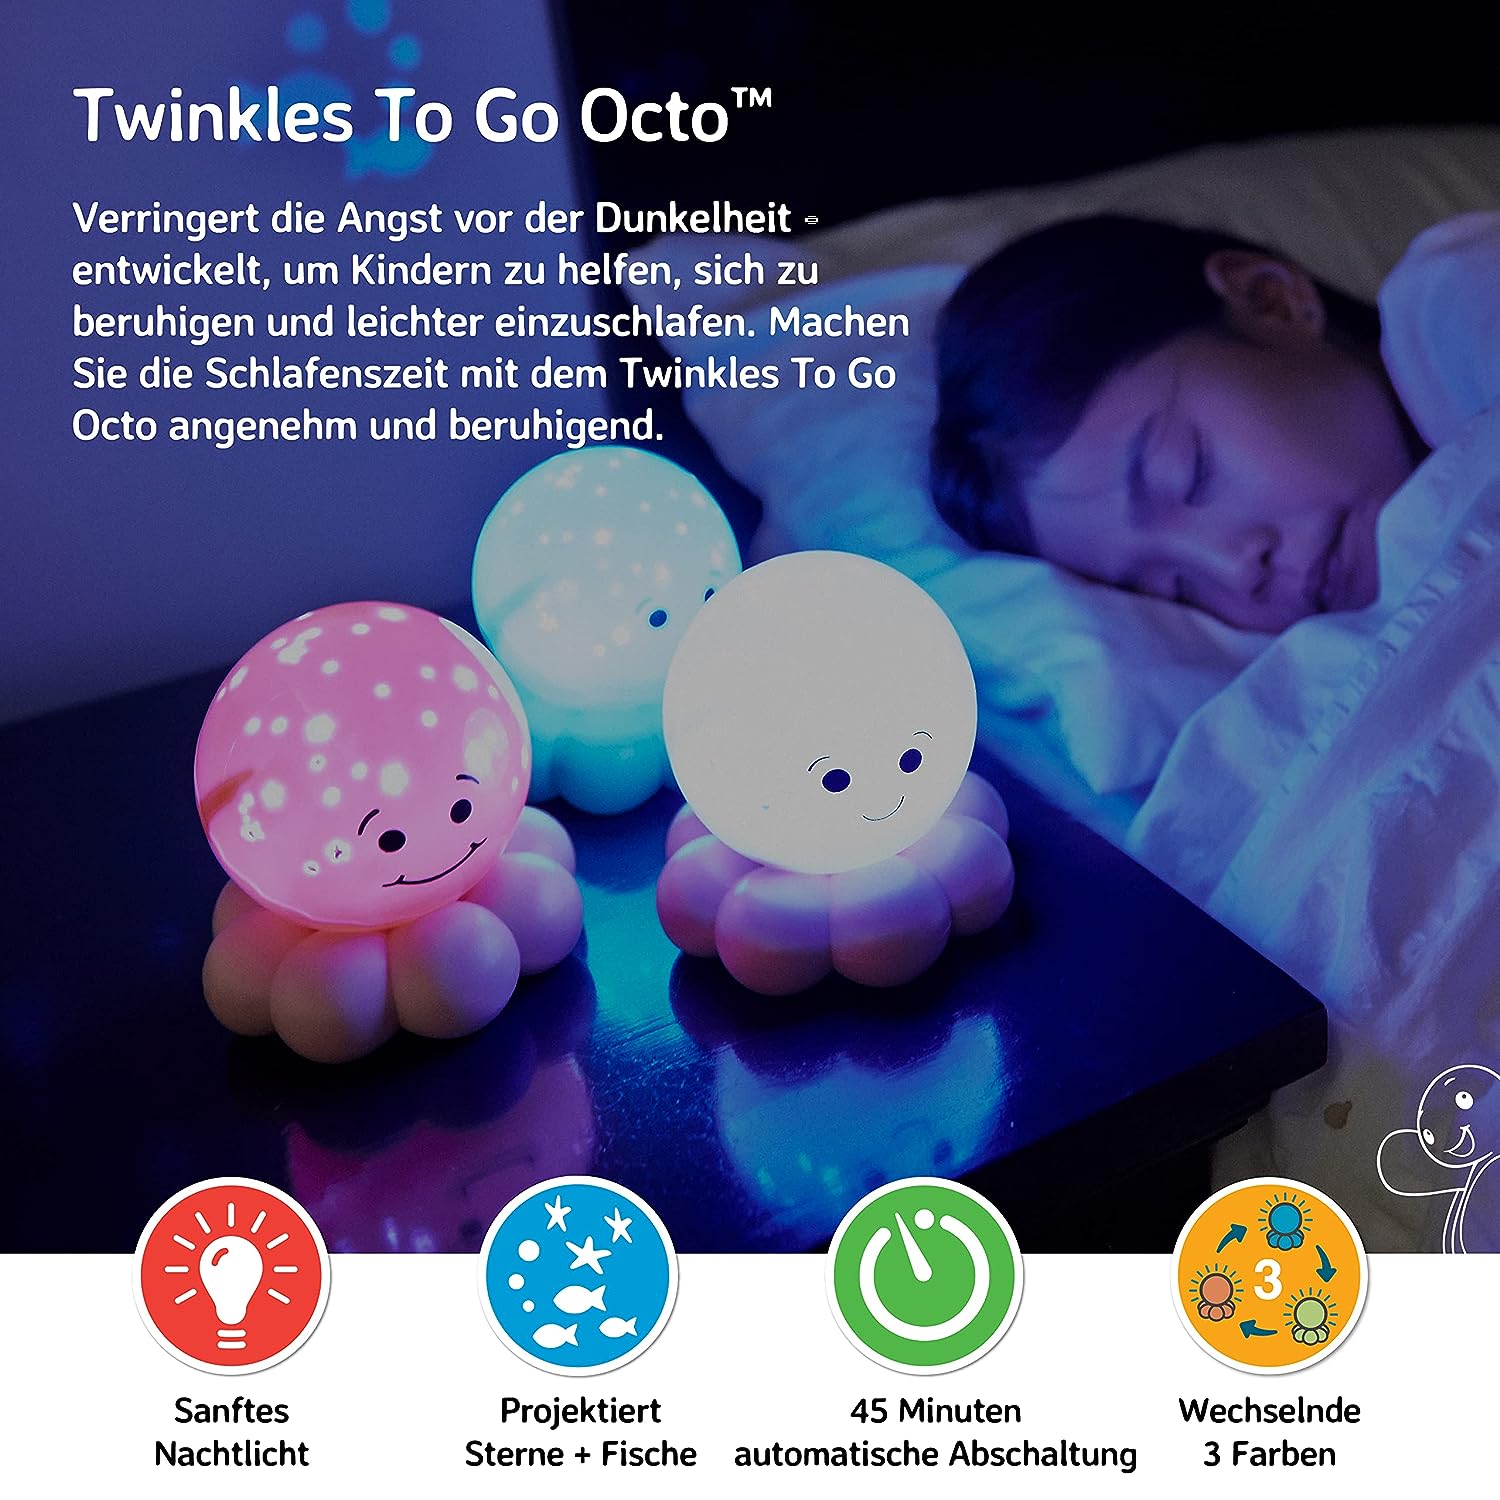 Twinkles Octo to go night light